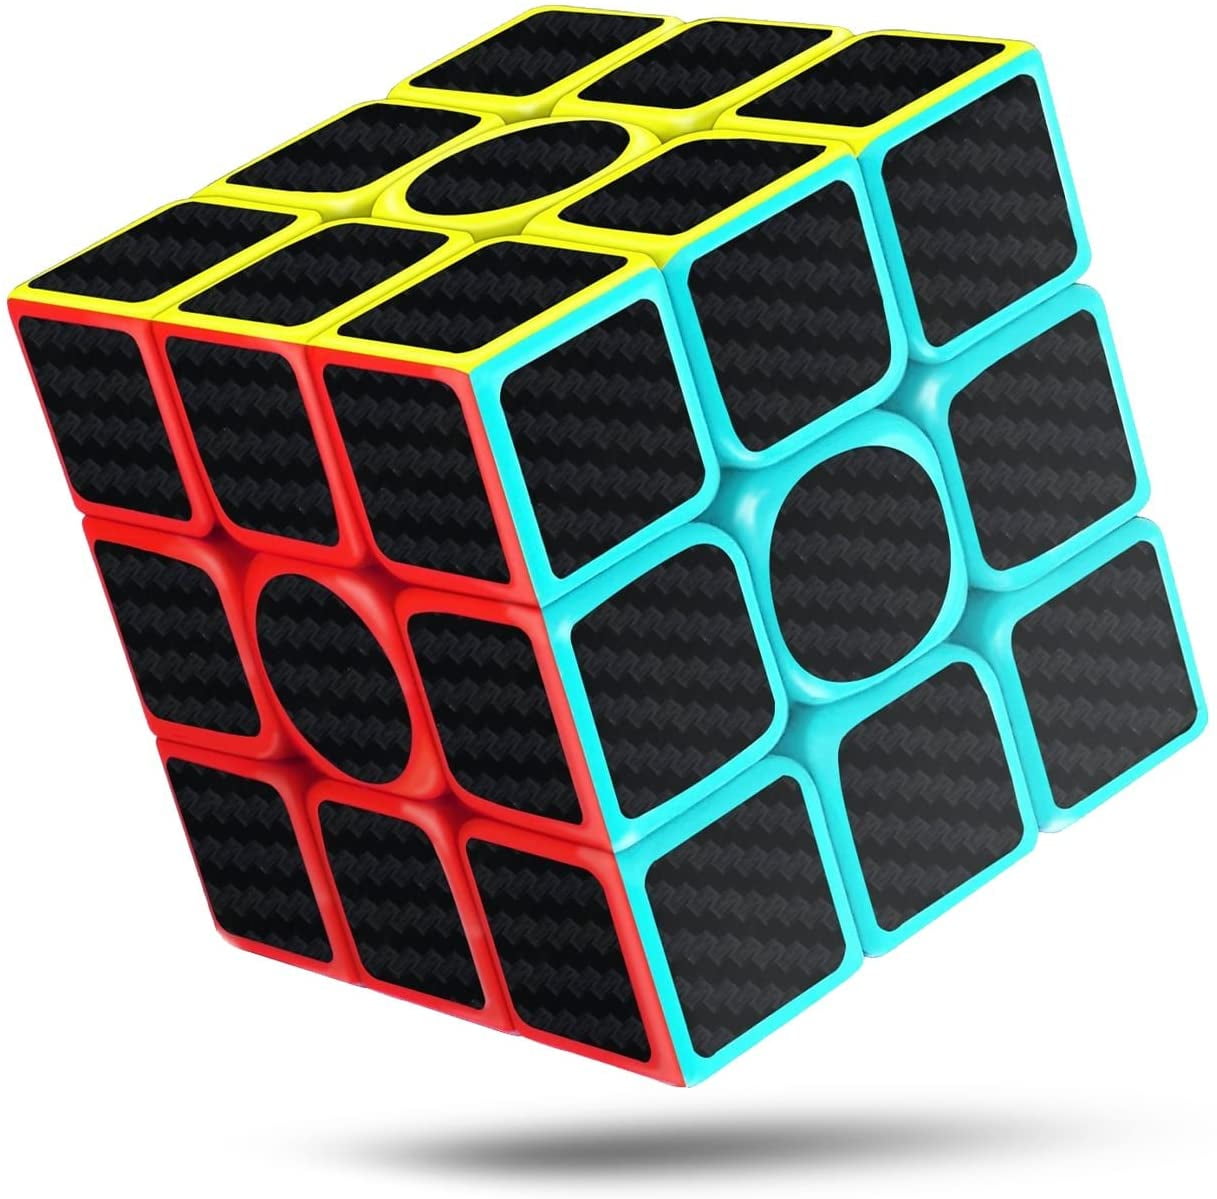 3x3x3 Magic Cube Professional Ultra-smooth 56mm Speed Cube Twist Puzzle Toy 